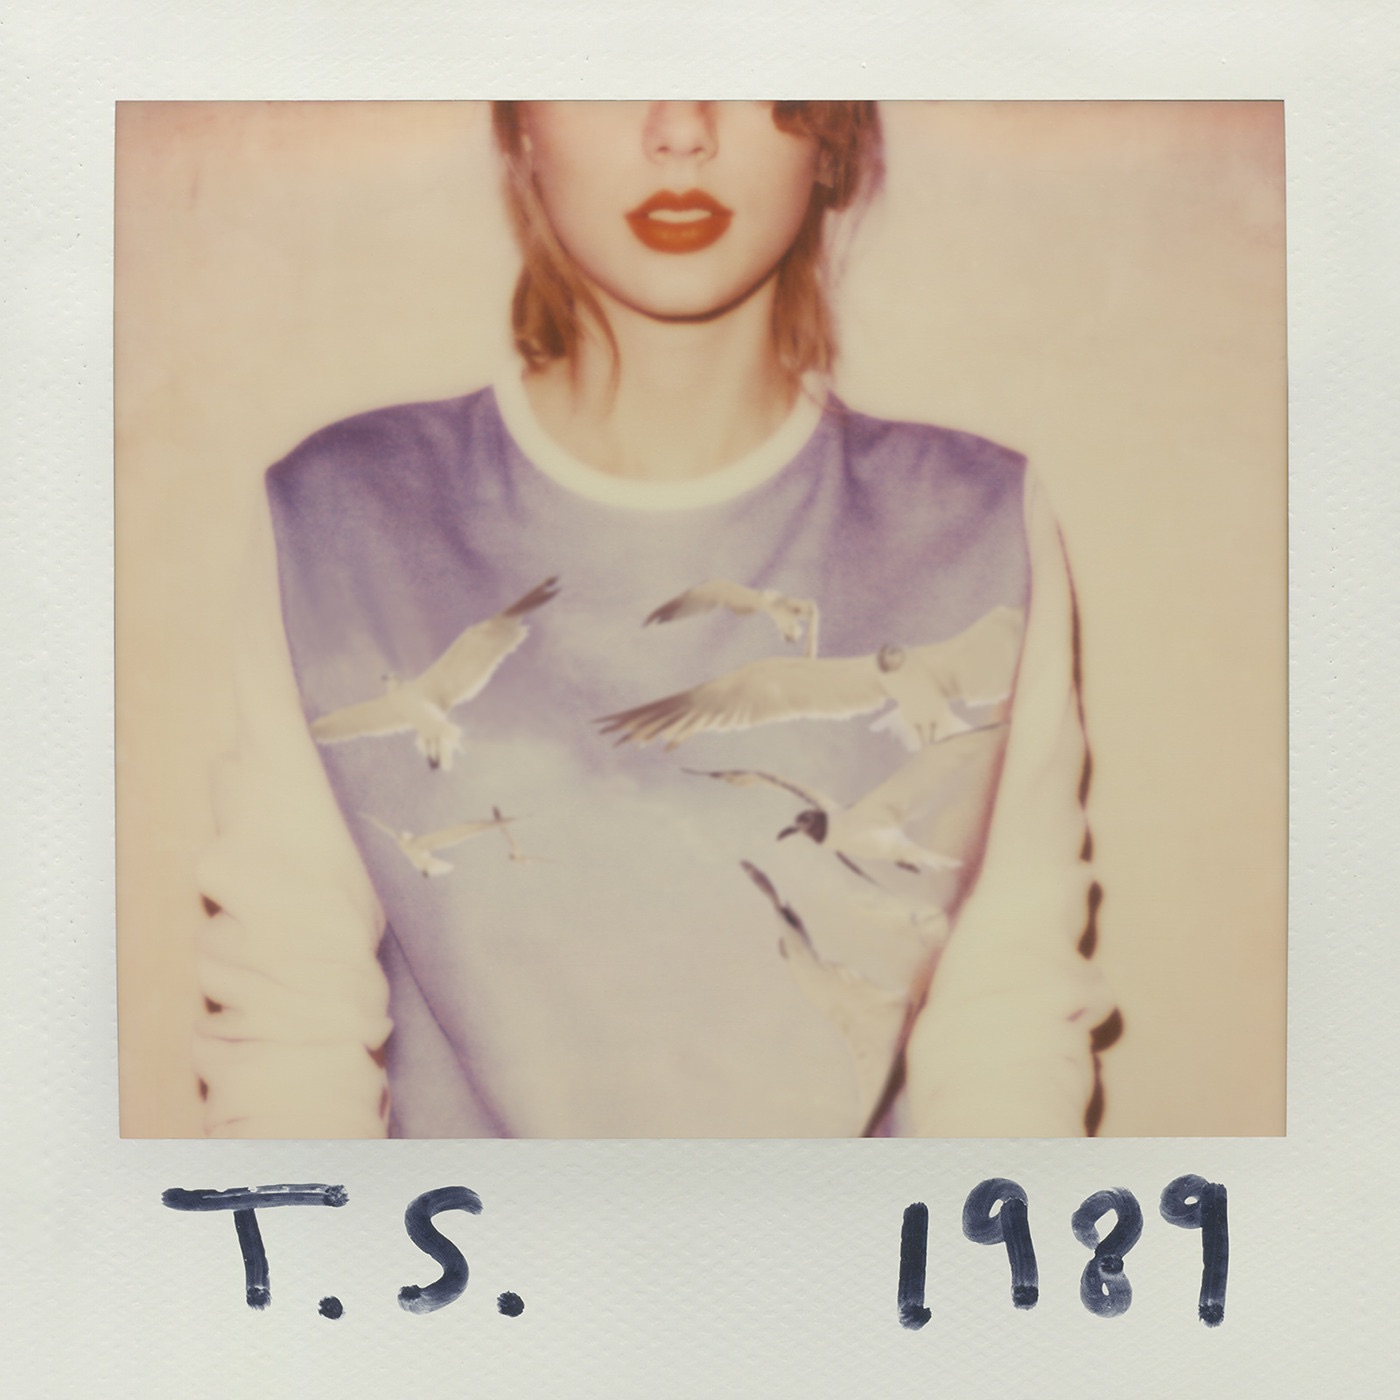 1989 by Taylor Swift, 1989 (Taylor's Version)